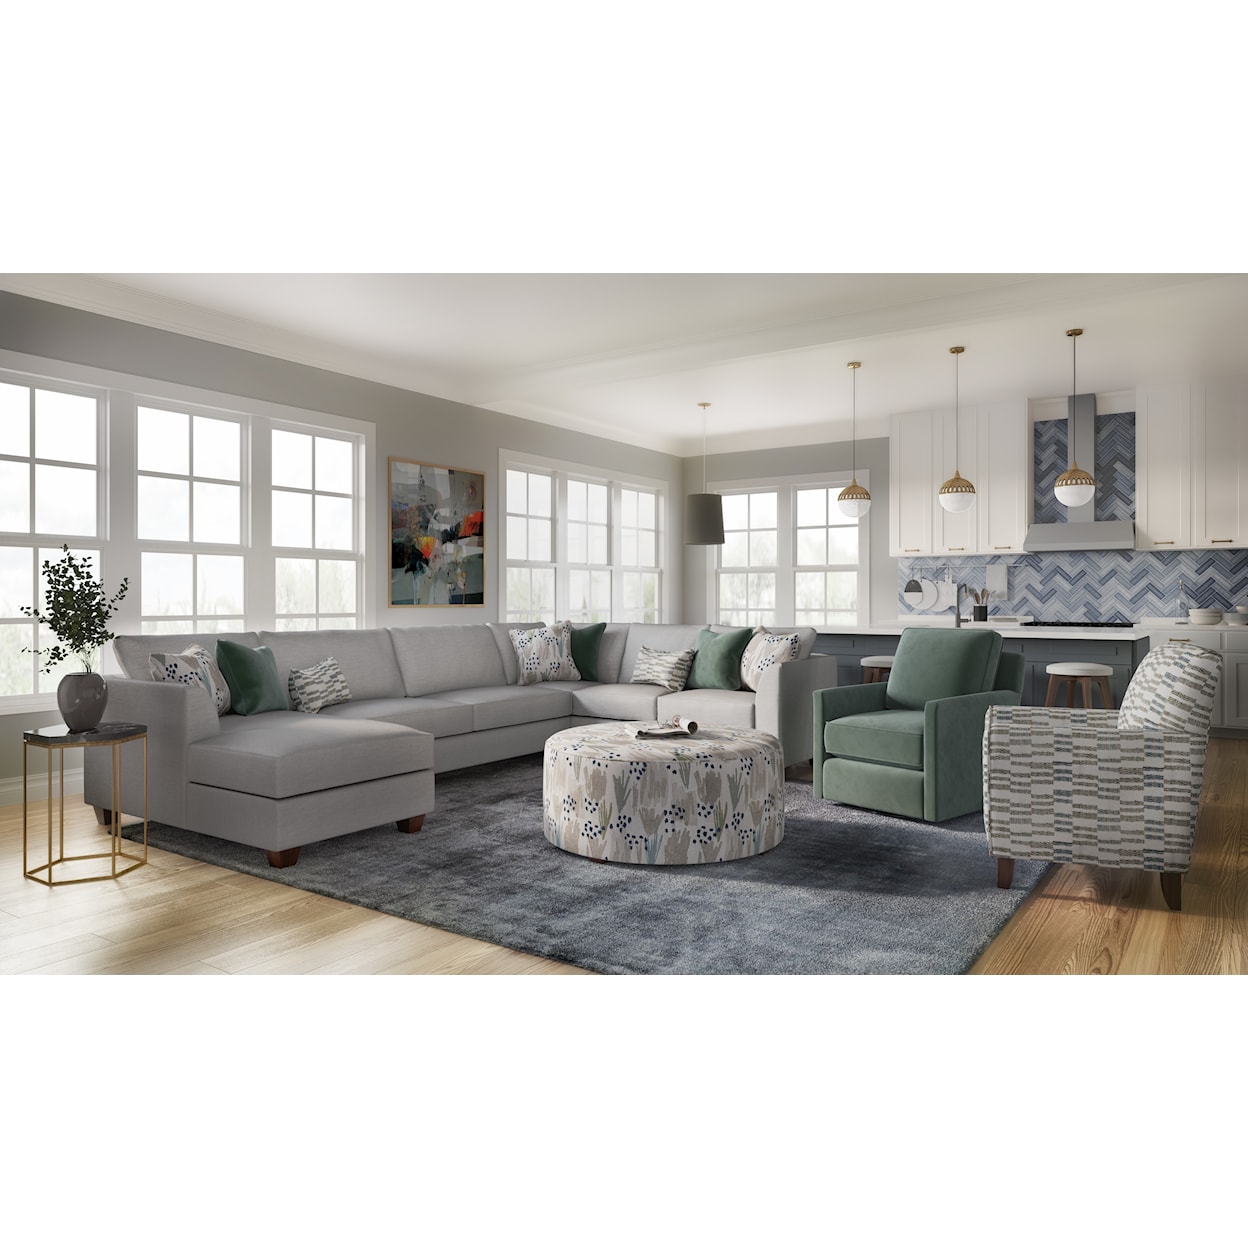 VFM Signature 28 WENDY LINEN Sectional with Chaise